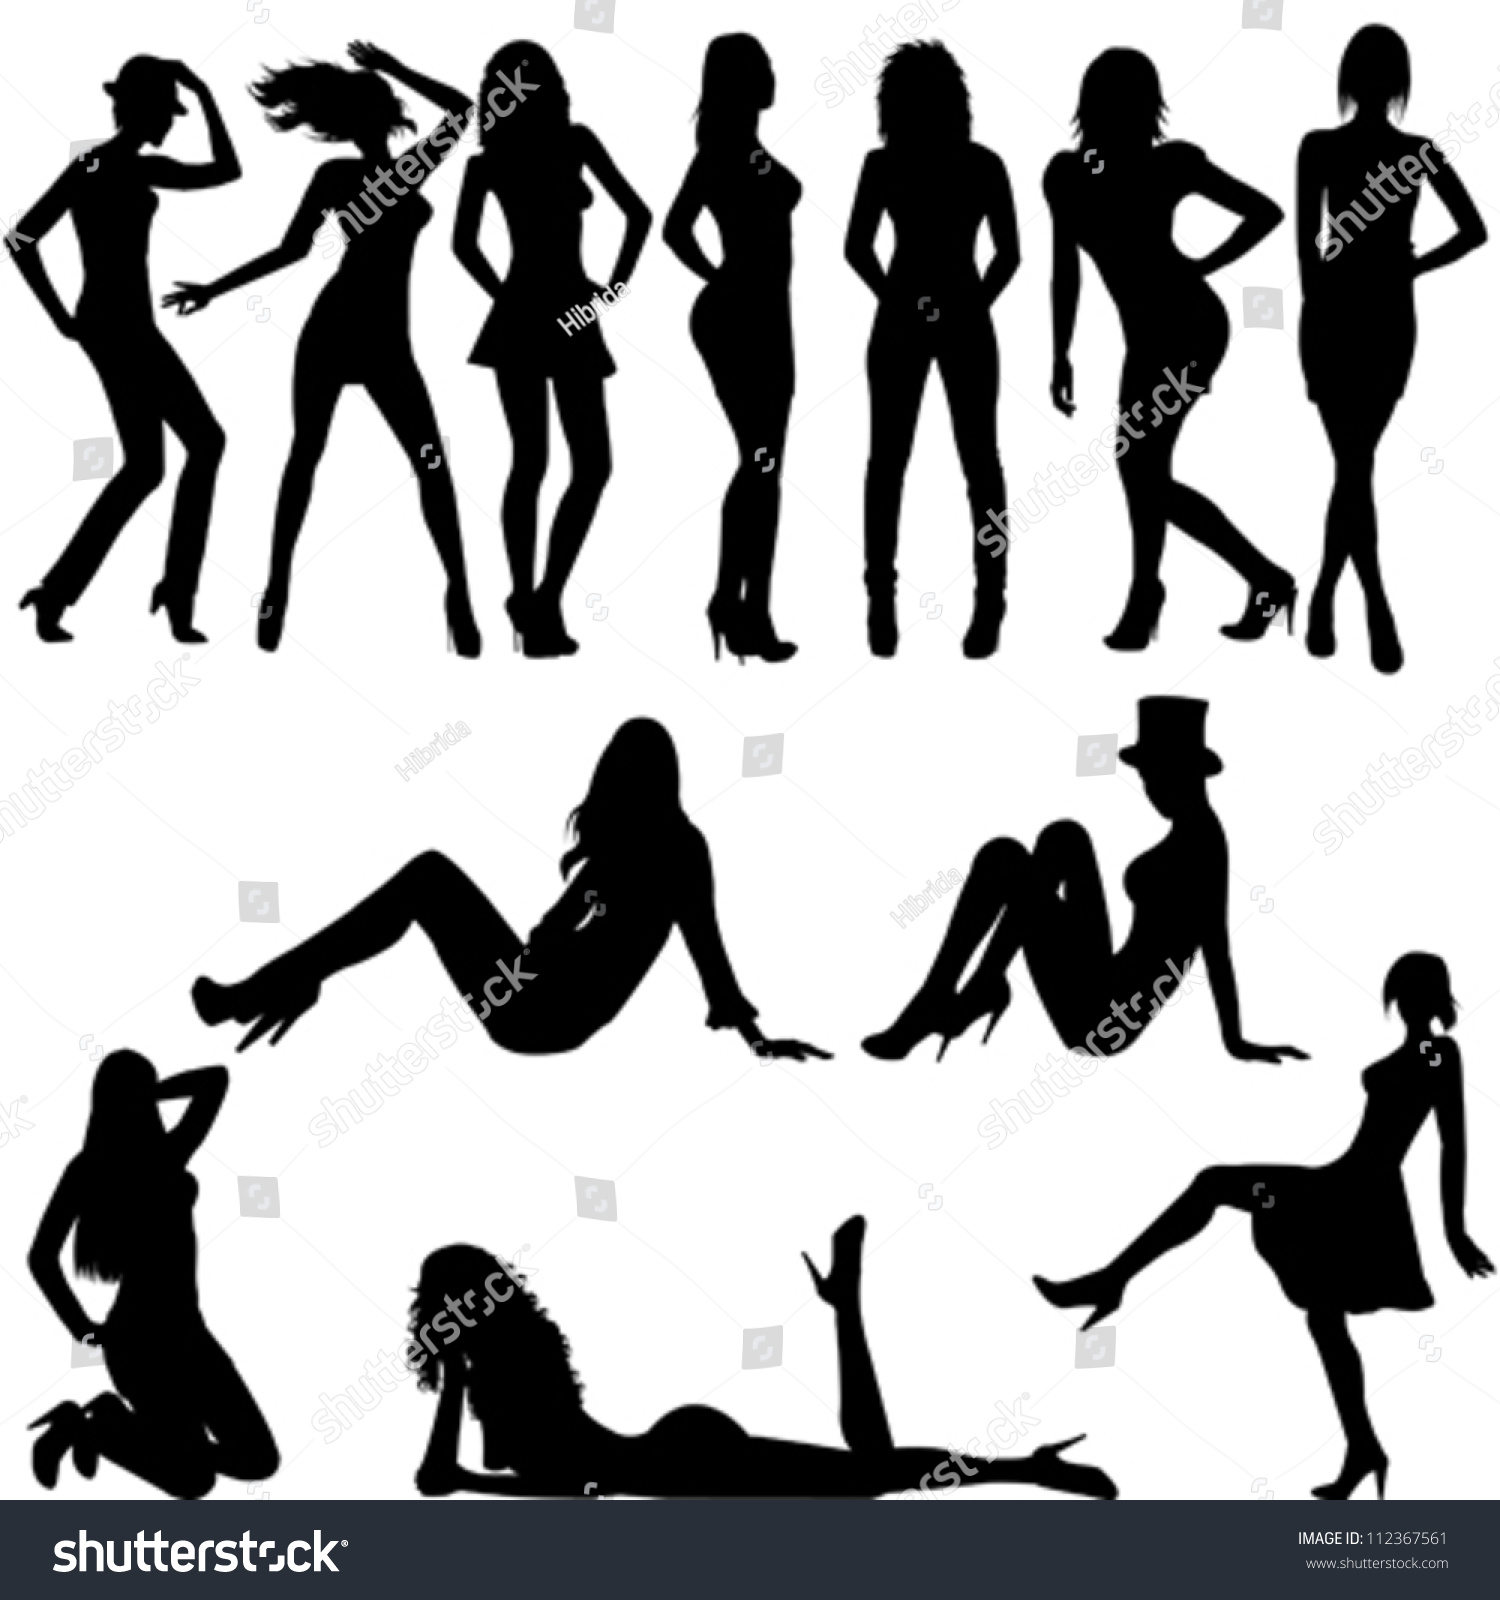 Set Of Sexy Women Silhouettes Stock Vector Illustration 112367561 Shutterstock 